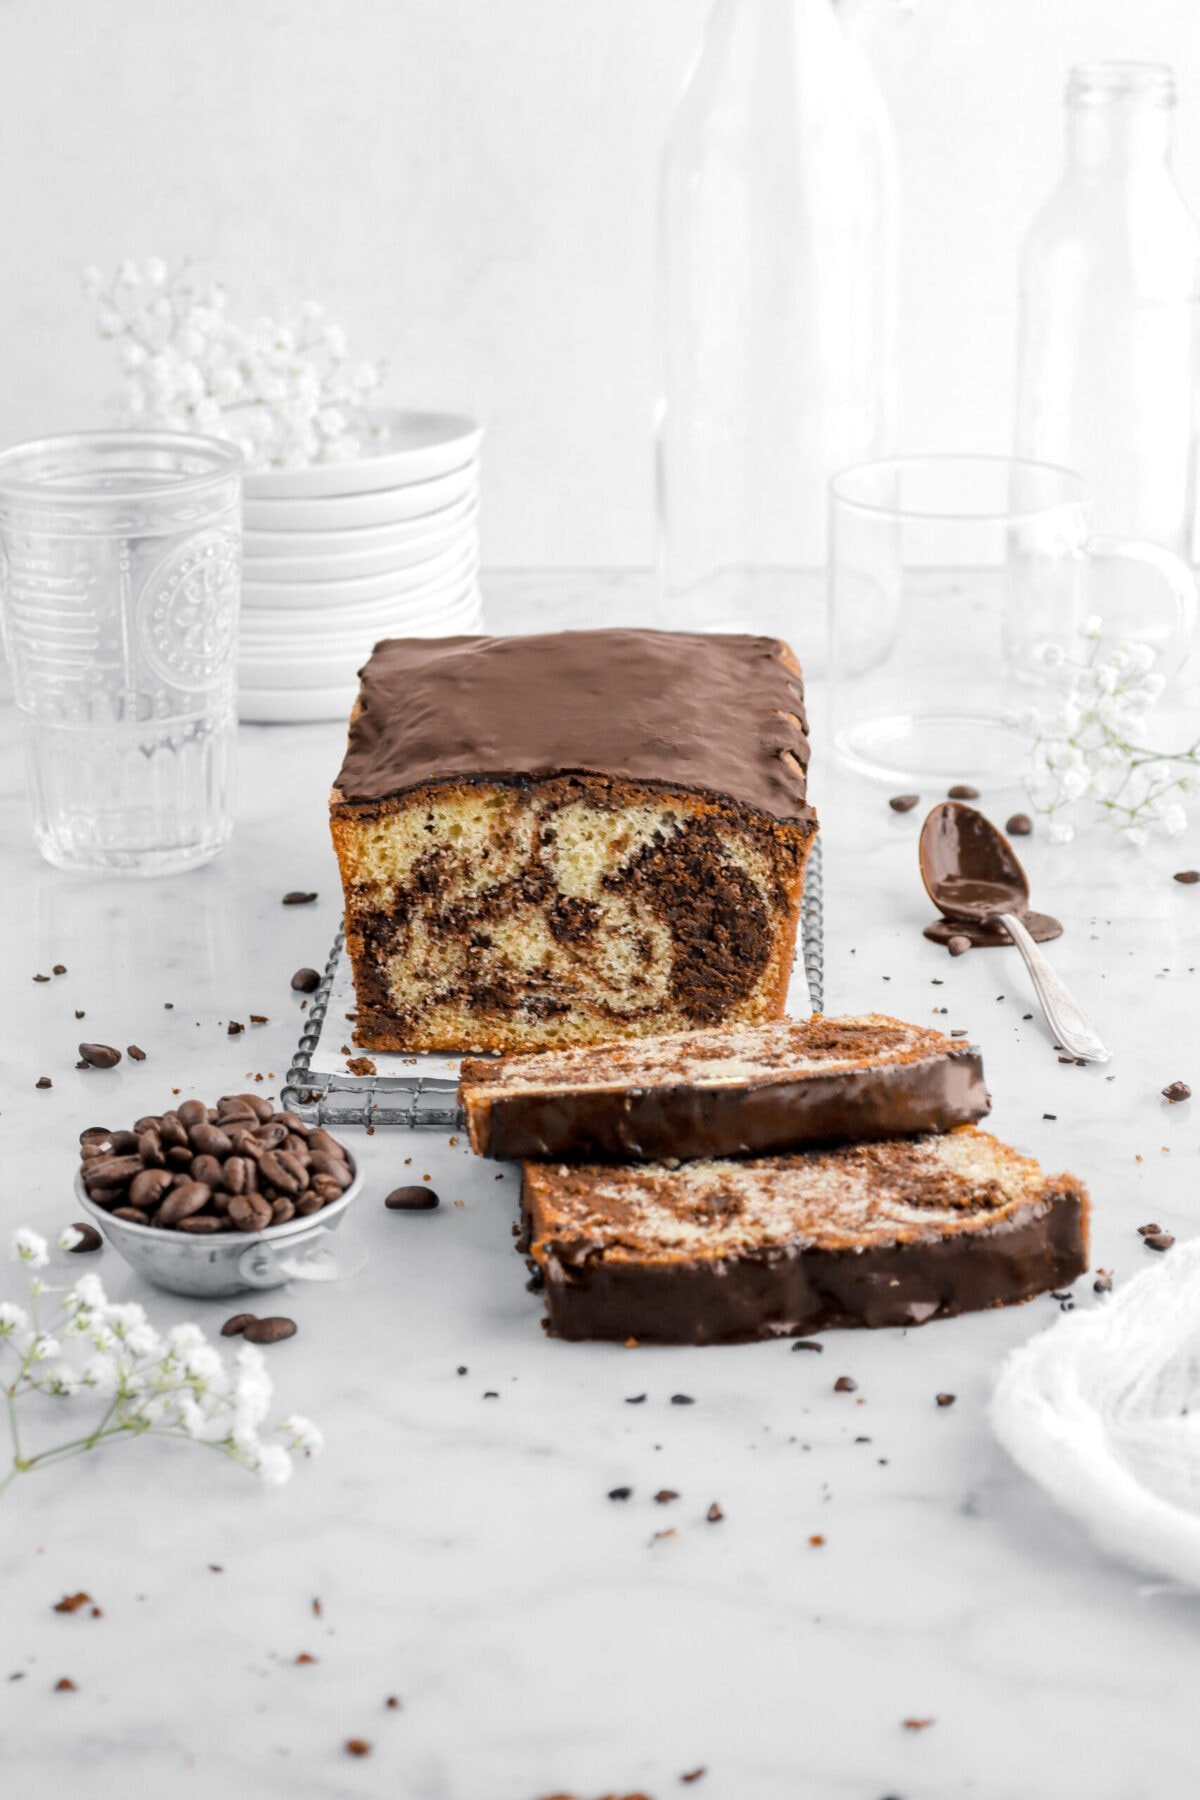 loaf cake with two slicing laying in front with chocolate icing on top with coffee beans and white flowers around, empty glasses and stack of plates behind.